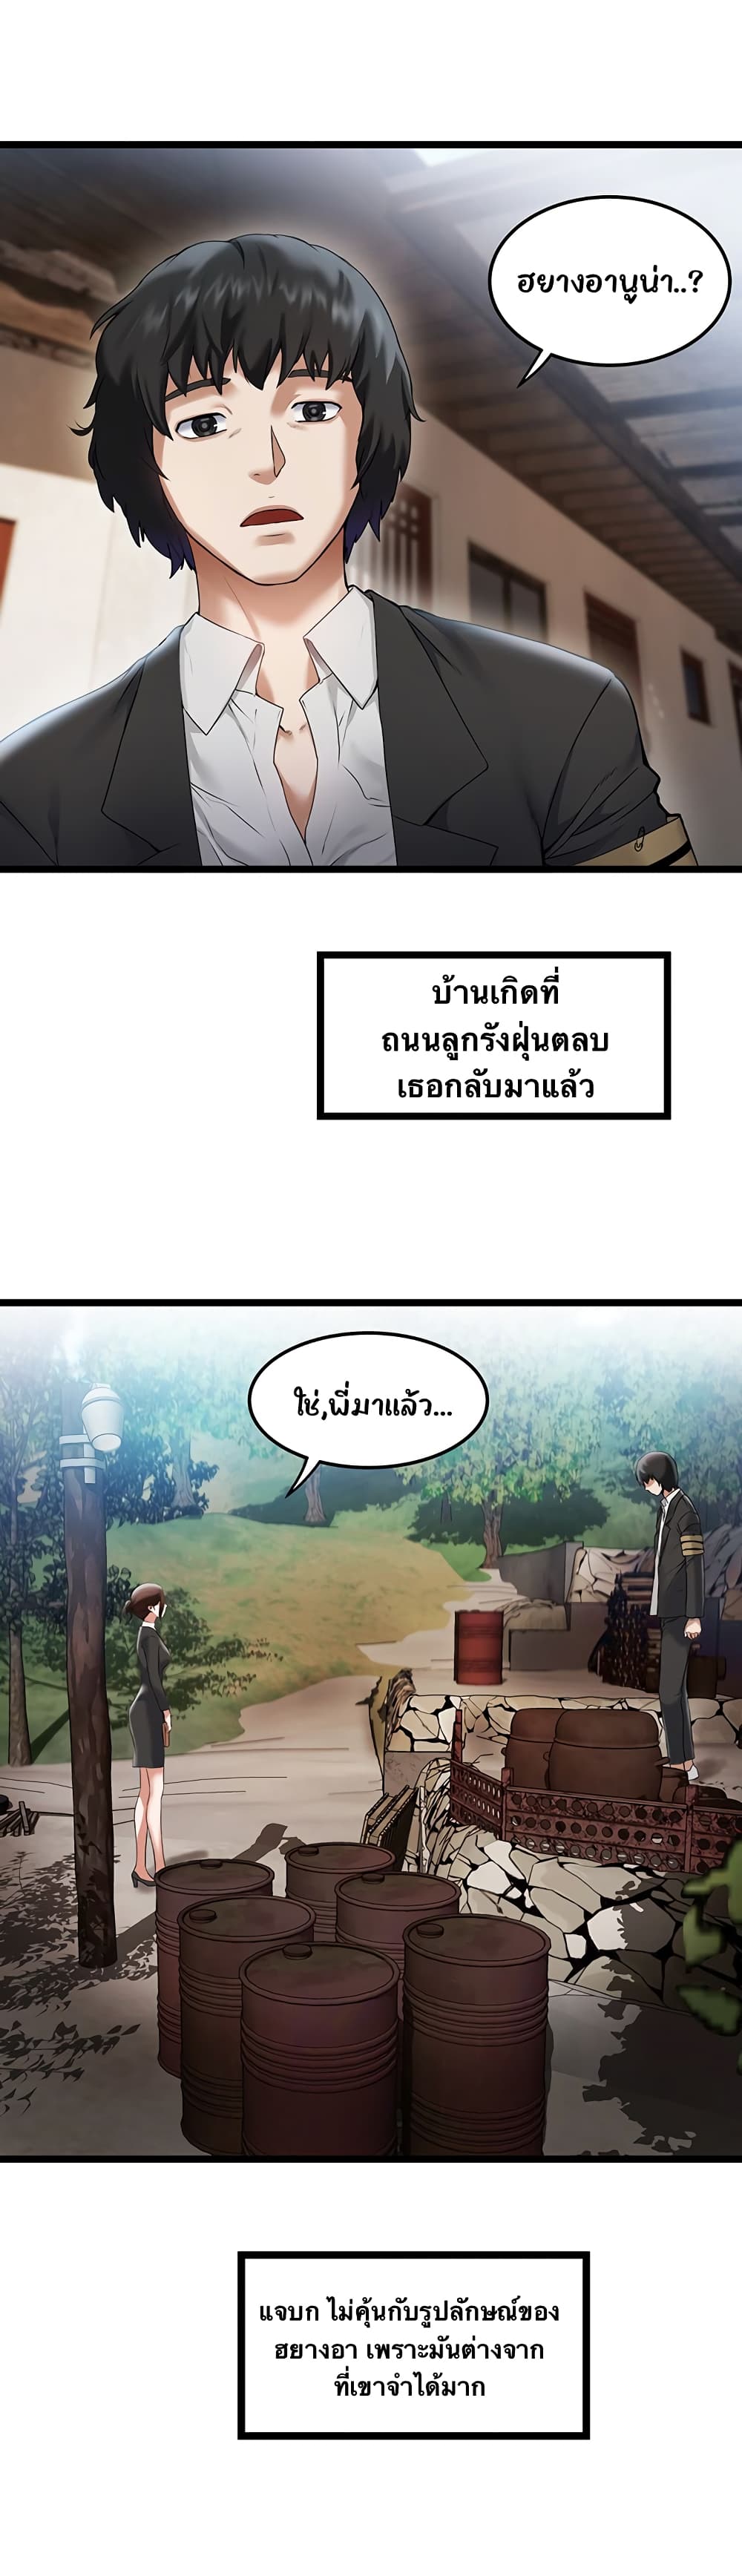 Bachelor in the country 1 ภาพที่ 11